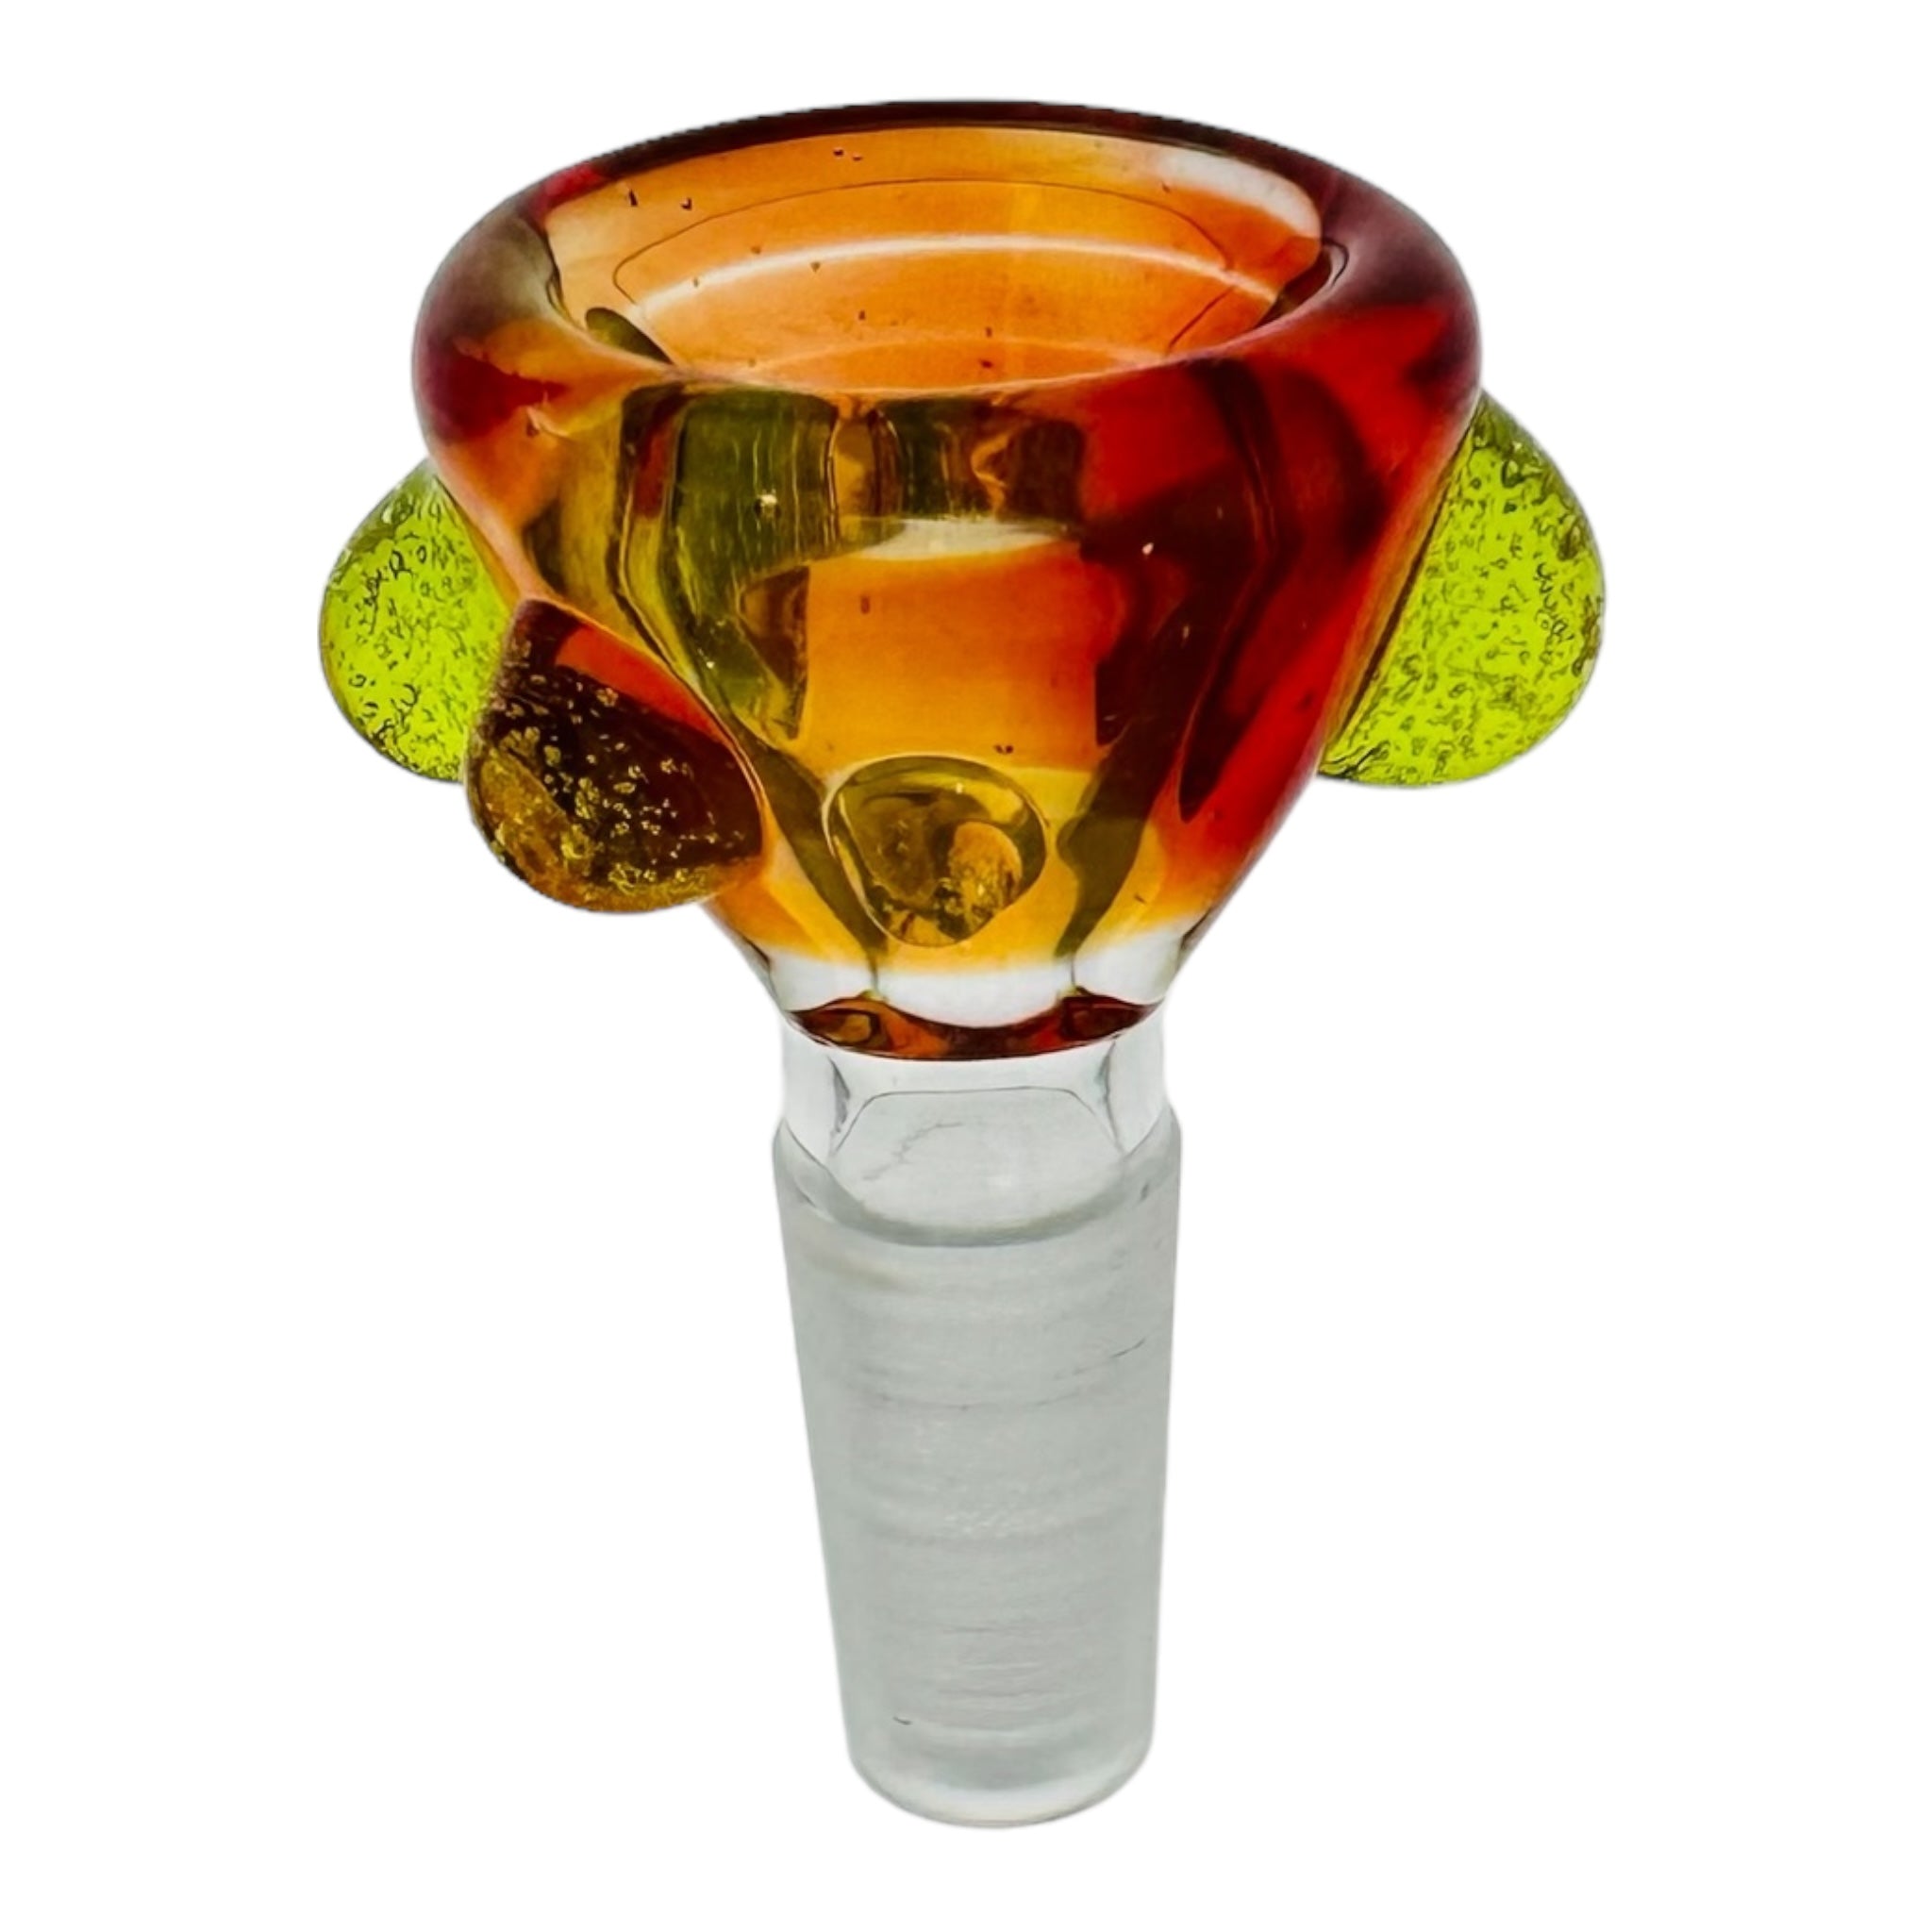 Arko Glass 10mm Bong Bowl For Weed Lava Red Bowl With Hatorade Green Dots